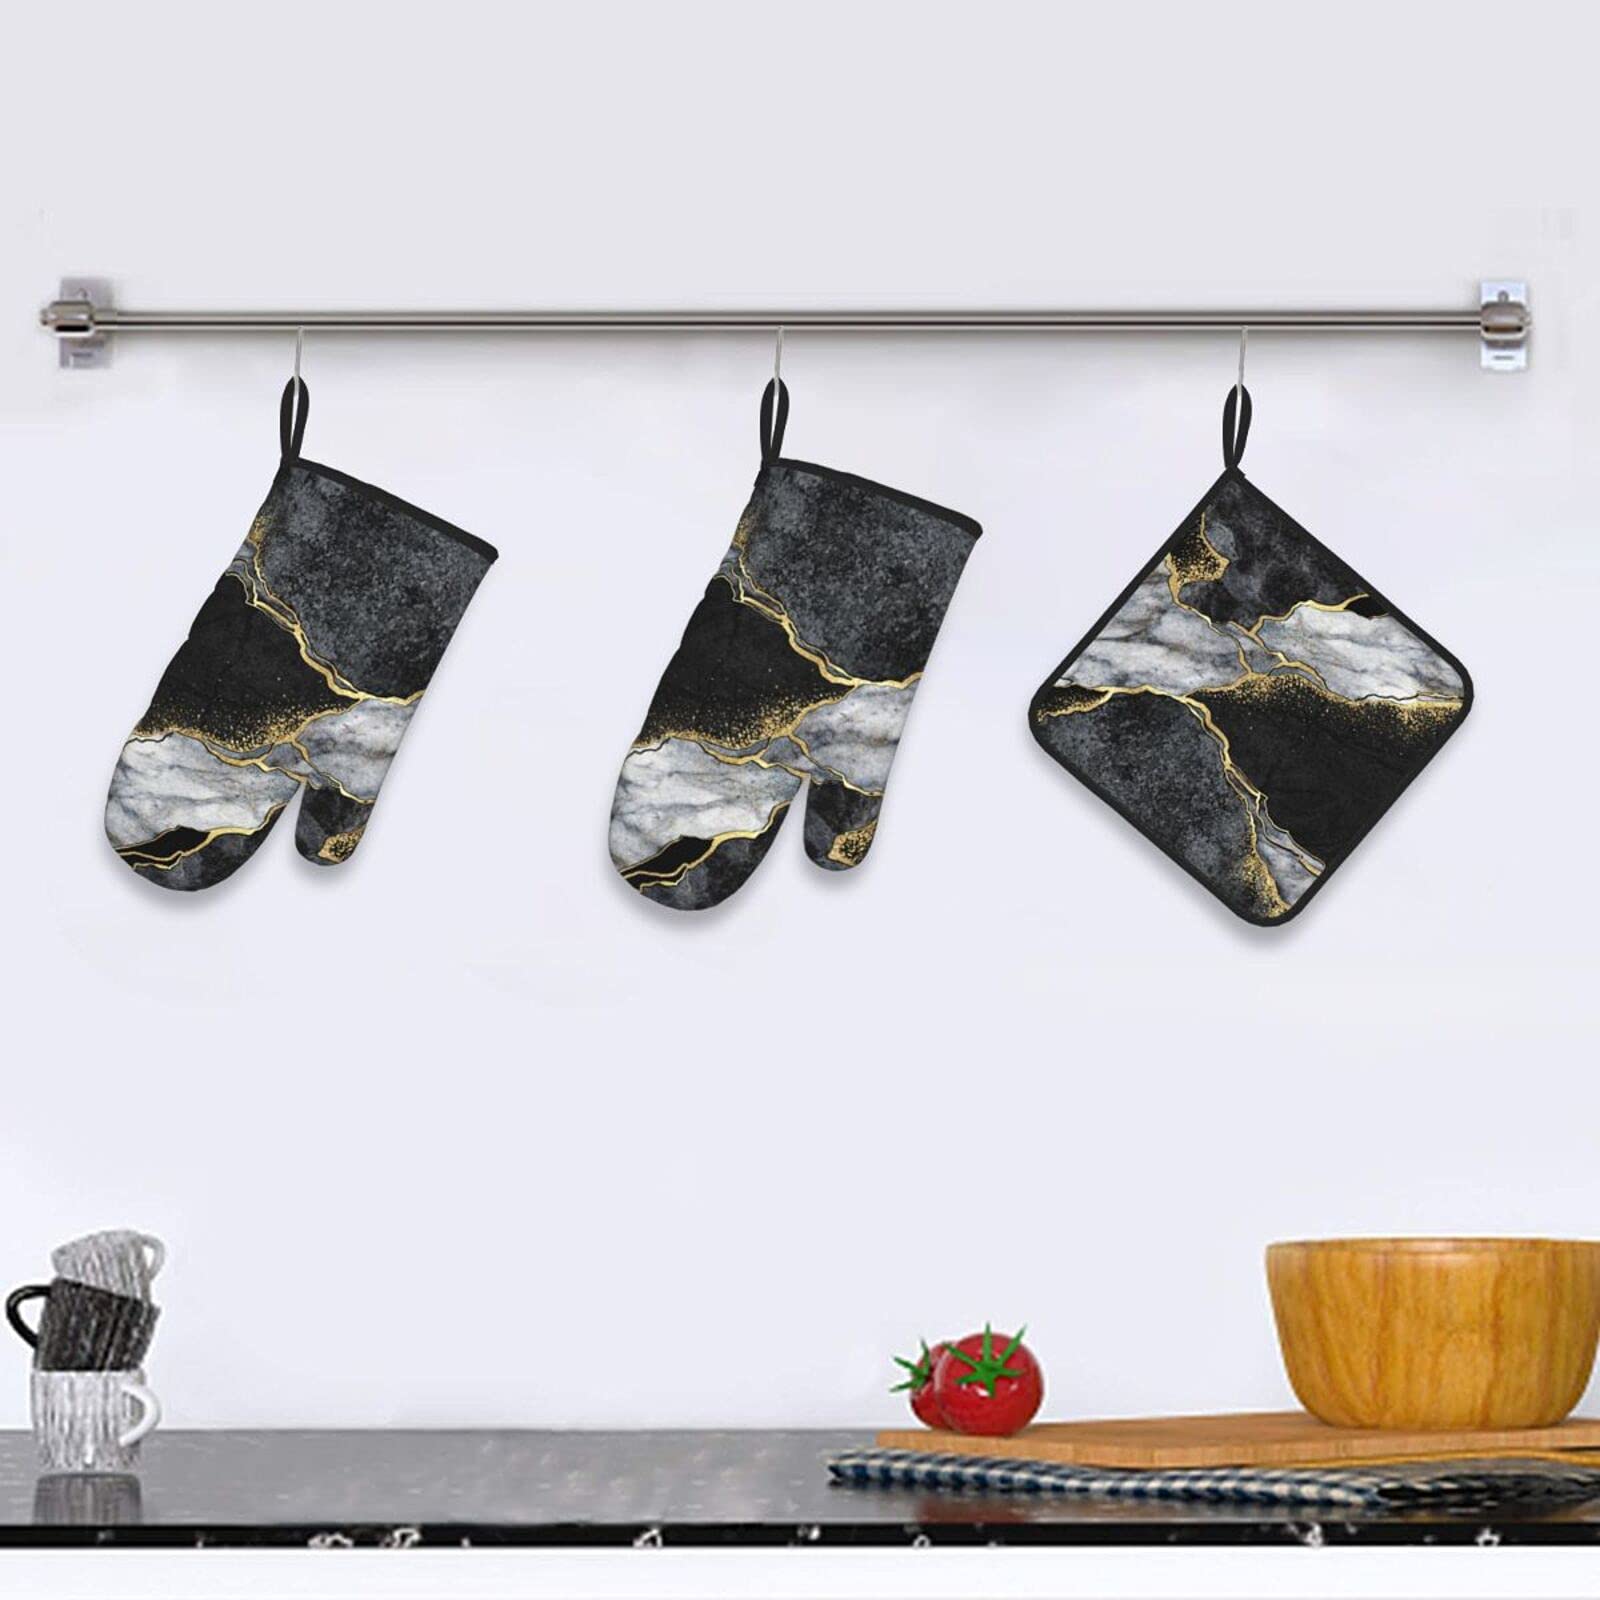 Oven Mitts and Pot Holders Sets of 3 Black Marble Gold Crack Kitchen Potholder Gloves Heat Resistant Non-Slip for Chef Baking Cooking Grilling BBQ Mittens